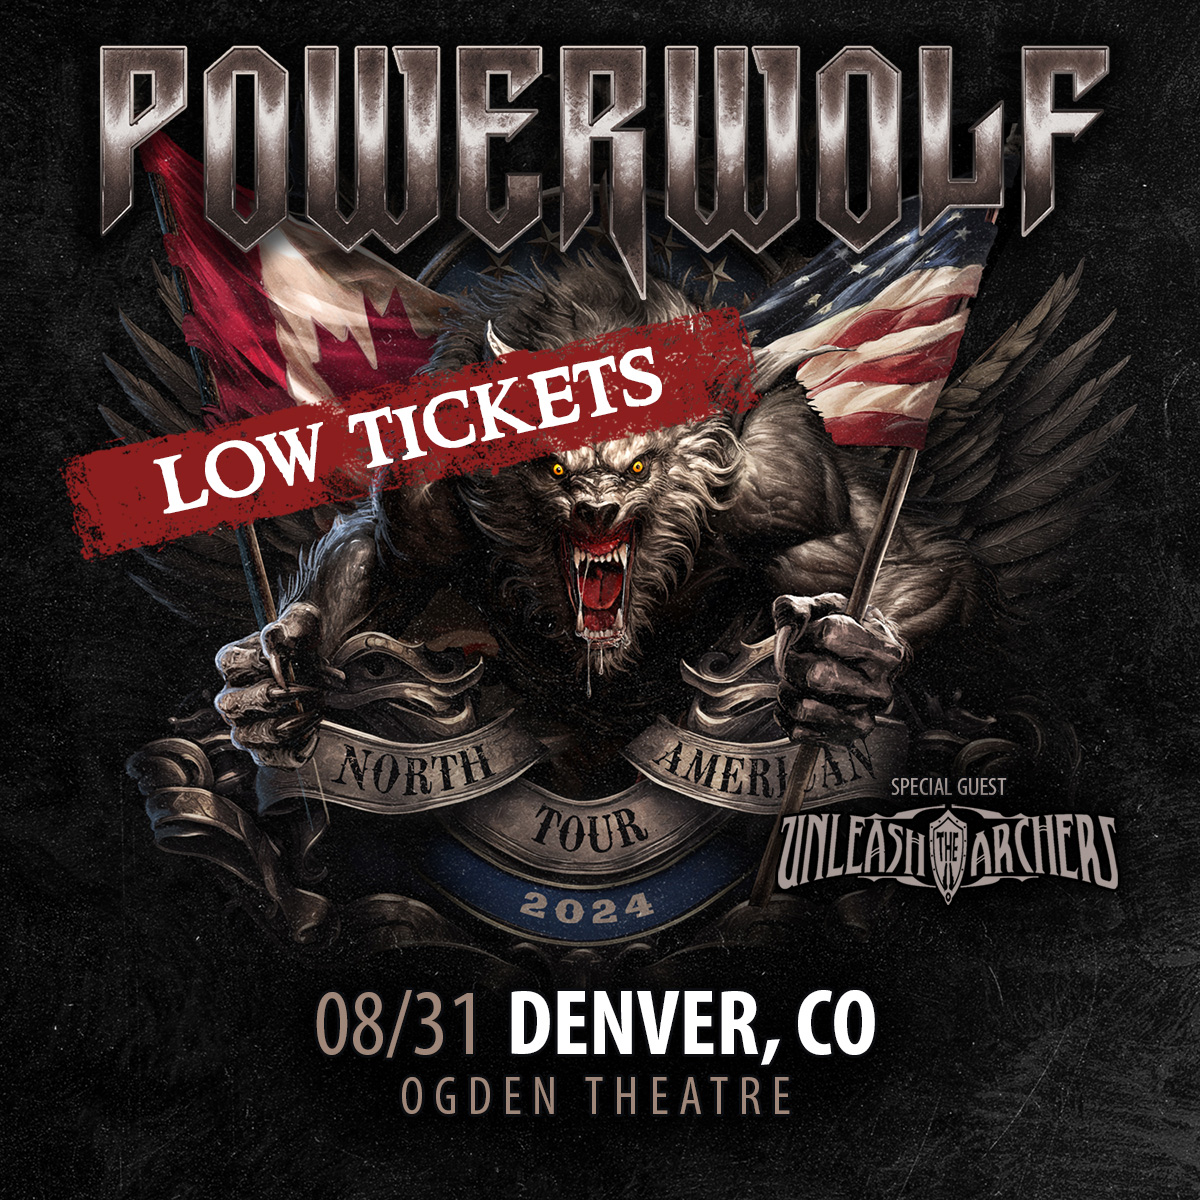 Let's go Denver, could your date be the first Sold Out announcement on our upcoming North American tour with Unleash The Archers? The other shows are also selling fast! It will be simply fantastic to celebrate with you all again! #powerwolf #denver #heavymetal